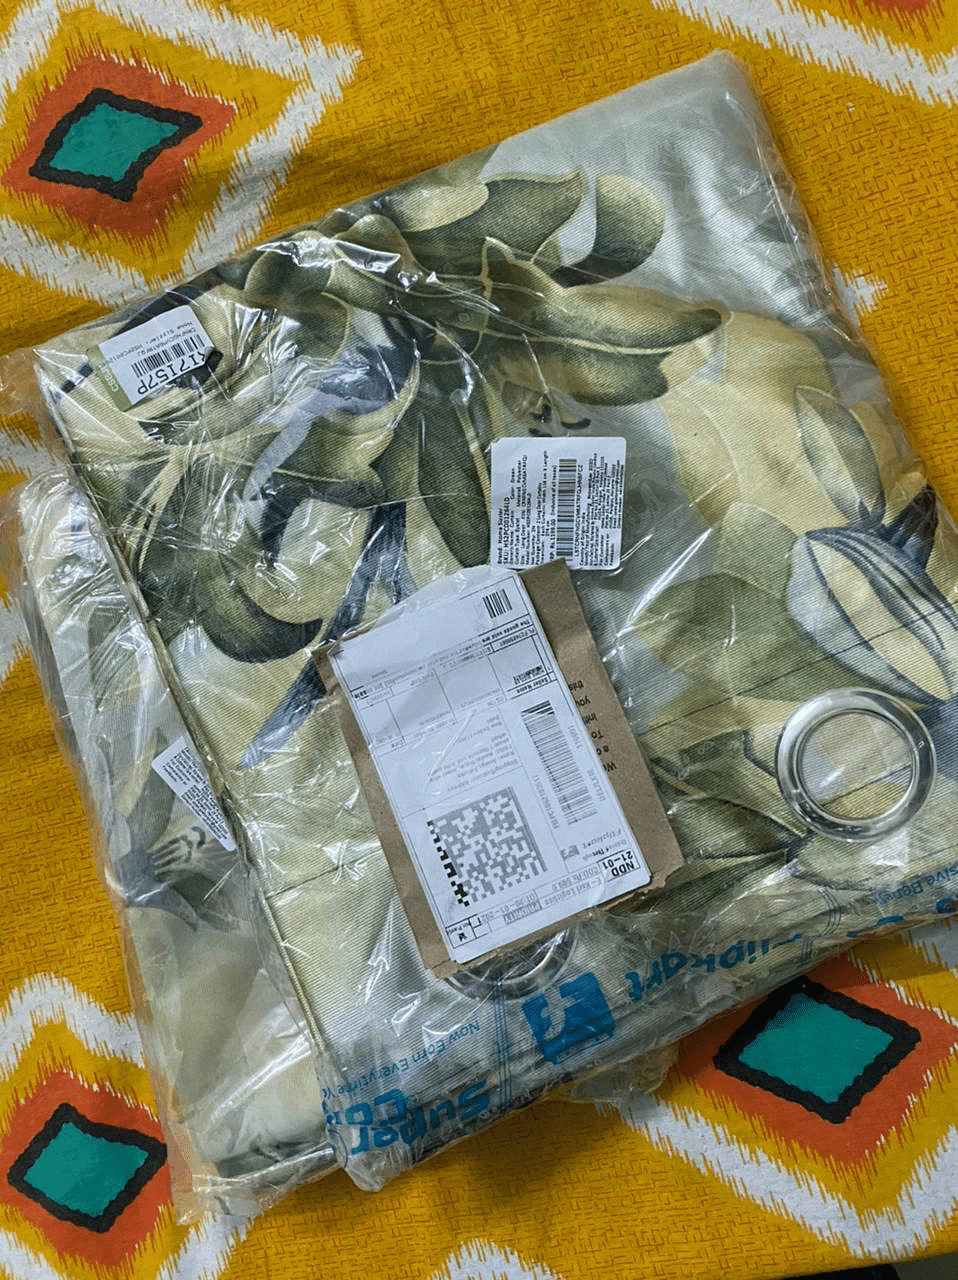 Curtains ordered from Flipkart received in a single layer packaging